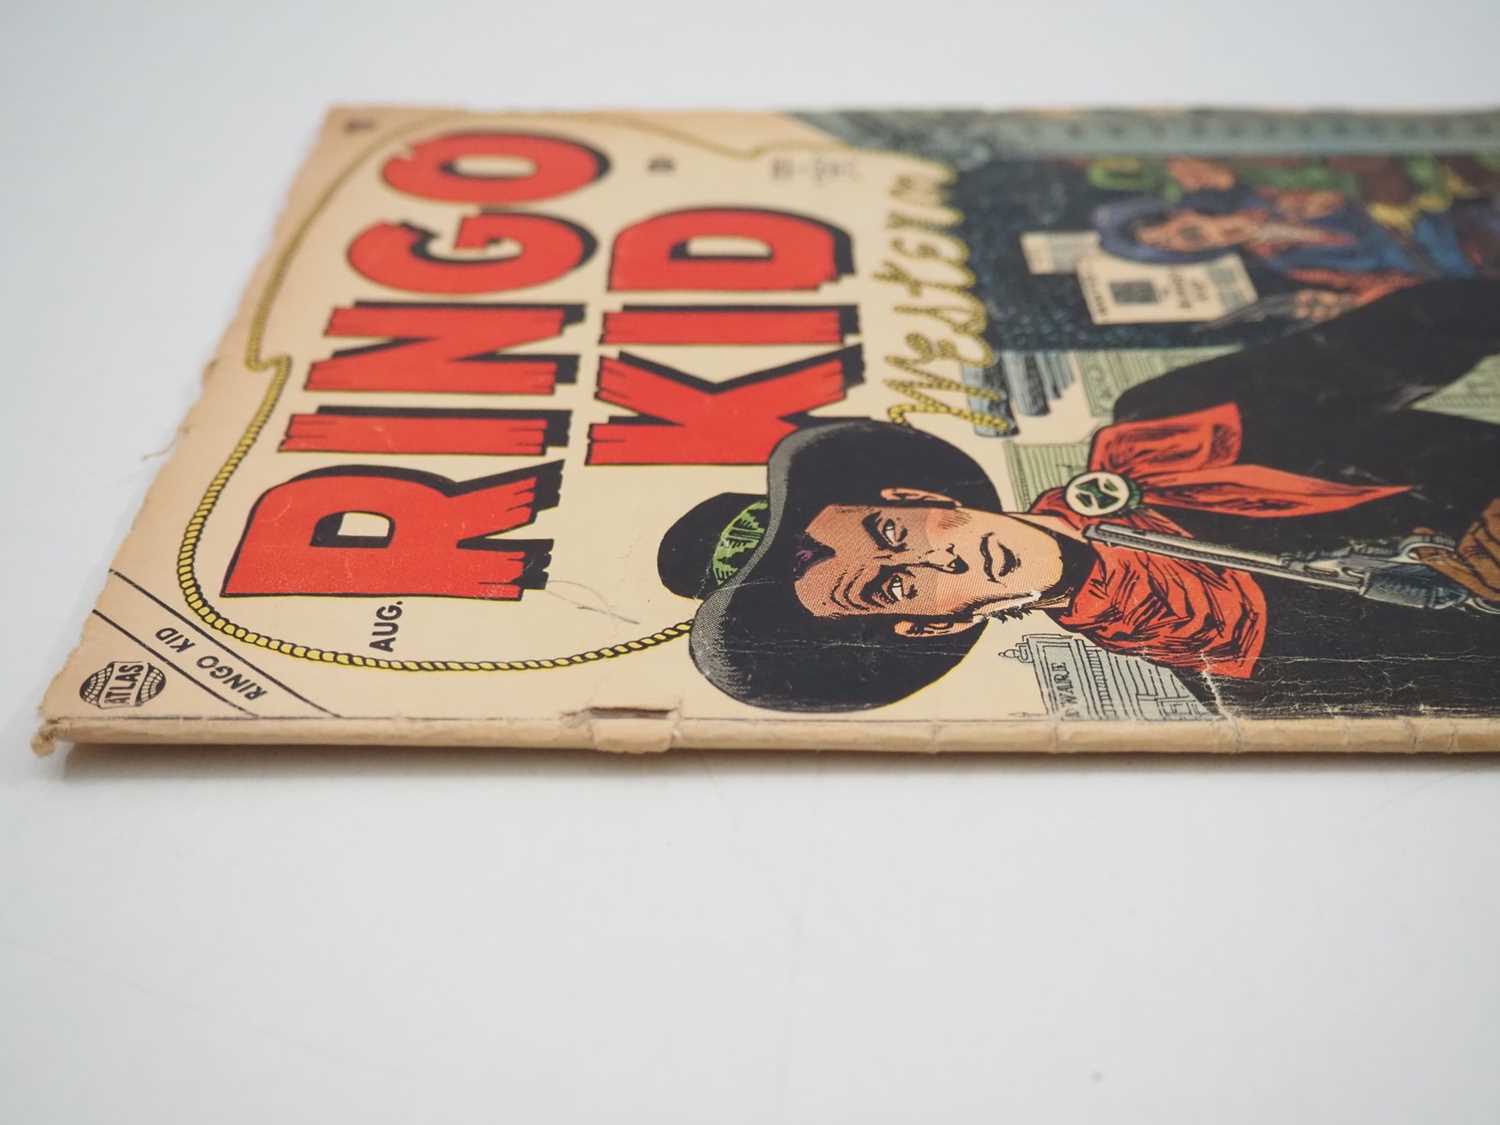 RINGO KID WESTERN #1 (1954 - ATLAS) - Includes Cover art by Joe Maneely - Flat/Unfolded - a detailed - Image 8 of 10